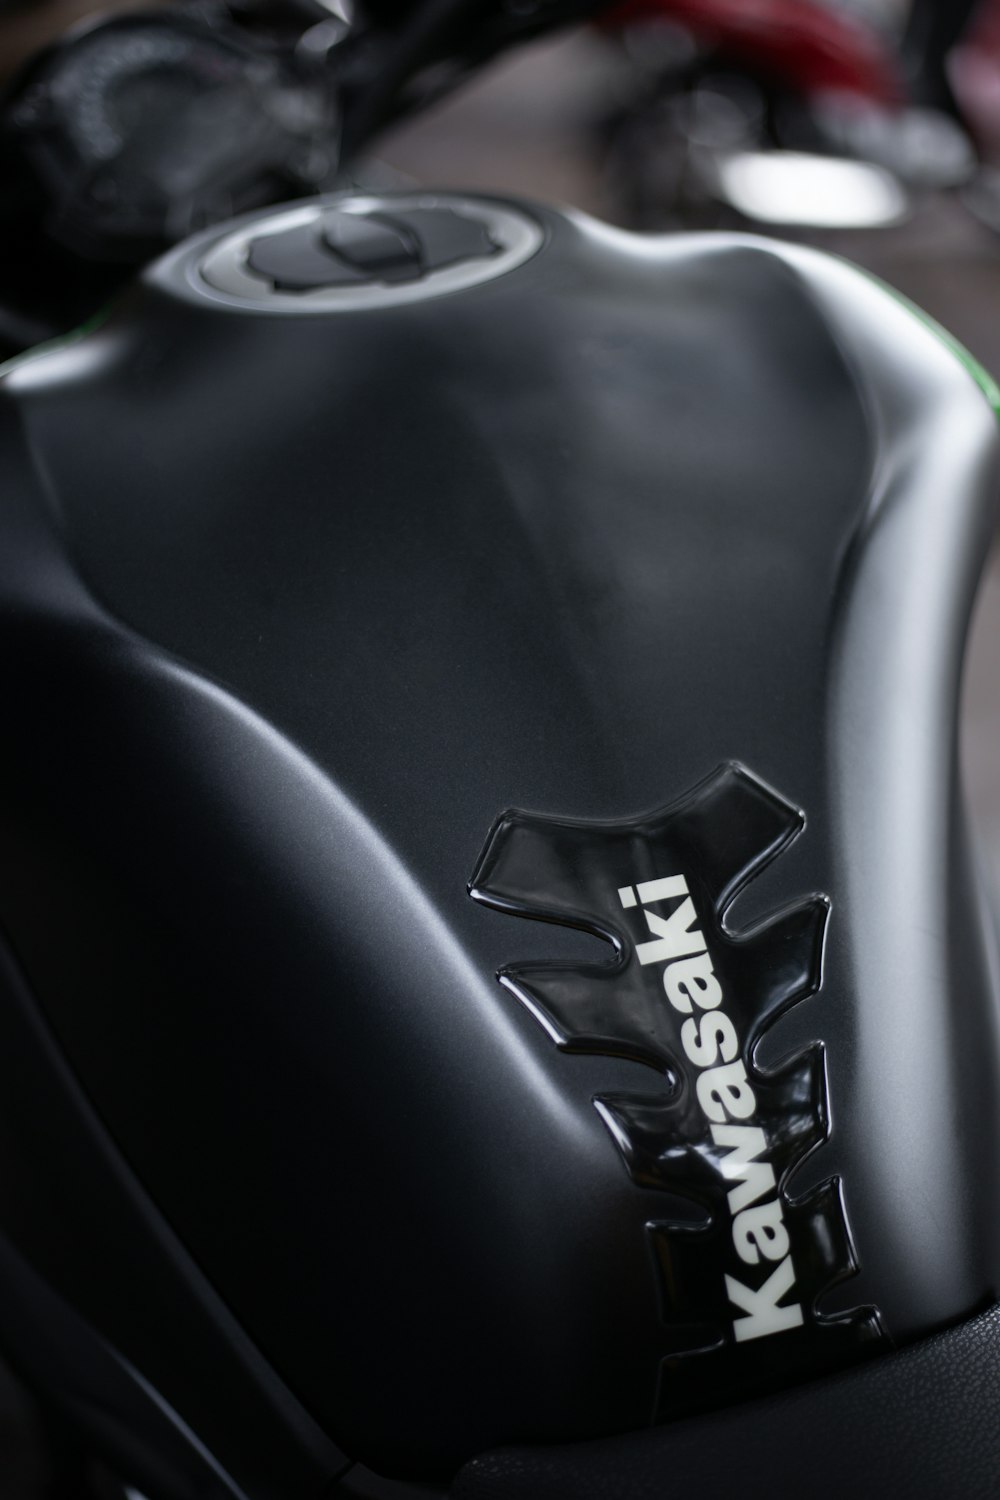 a close up of a motorcycle with a logo on it